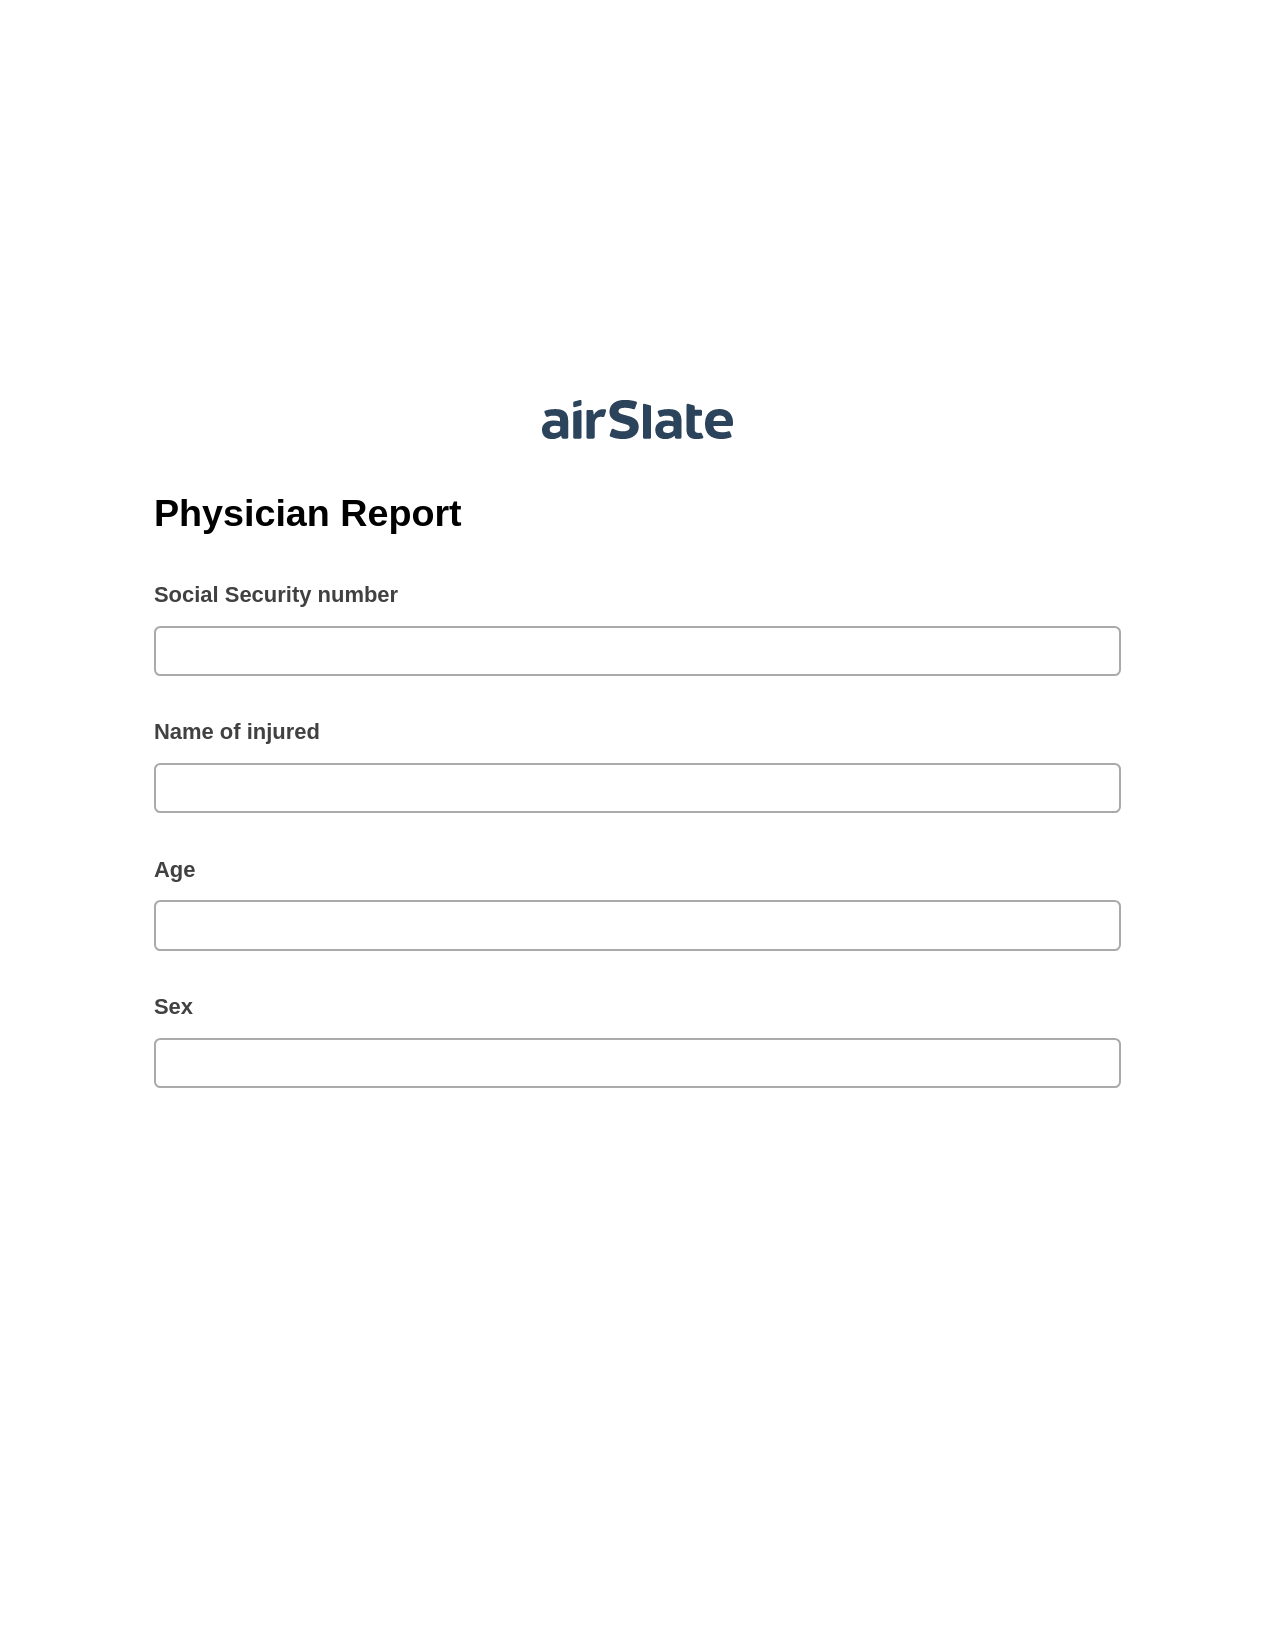 Physician Report Pre-fill from Excel Spreadsheet Bot, Update Audit Trail Bot, Archive to Box Bot